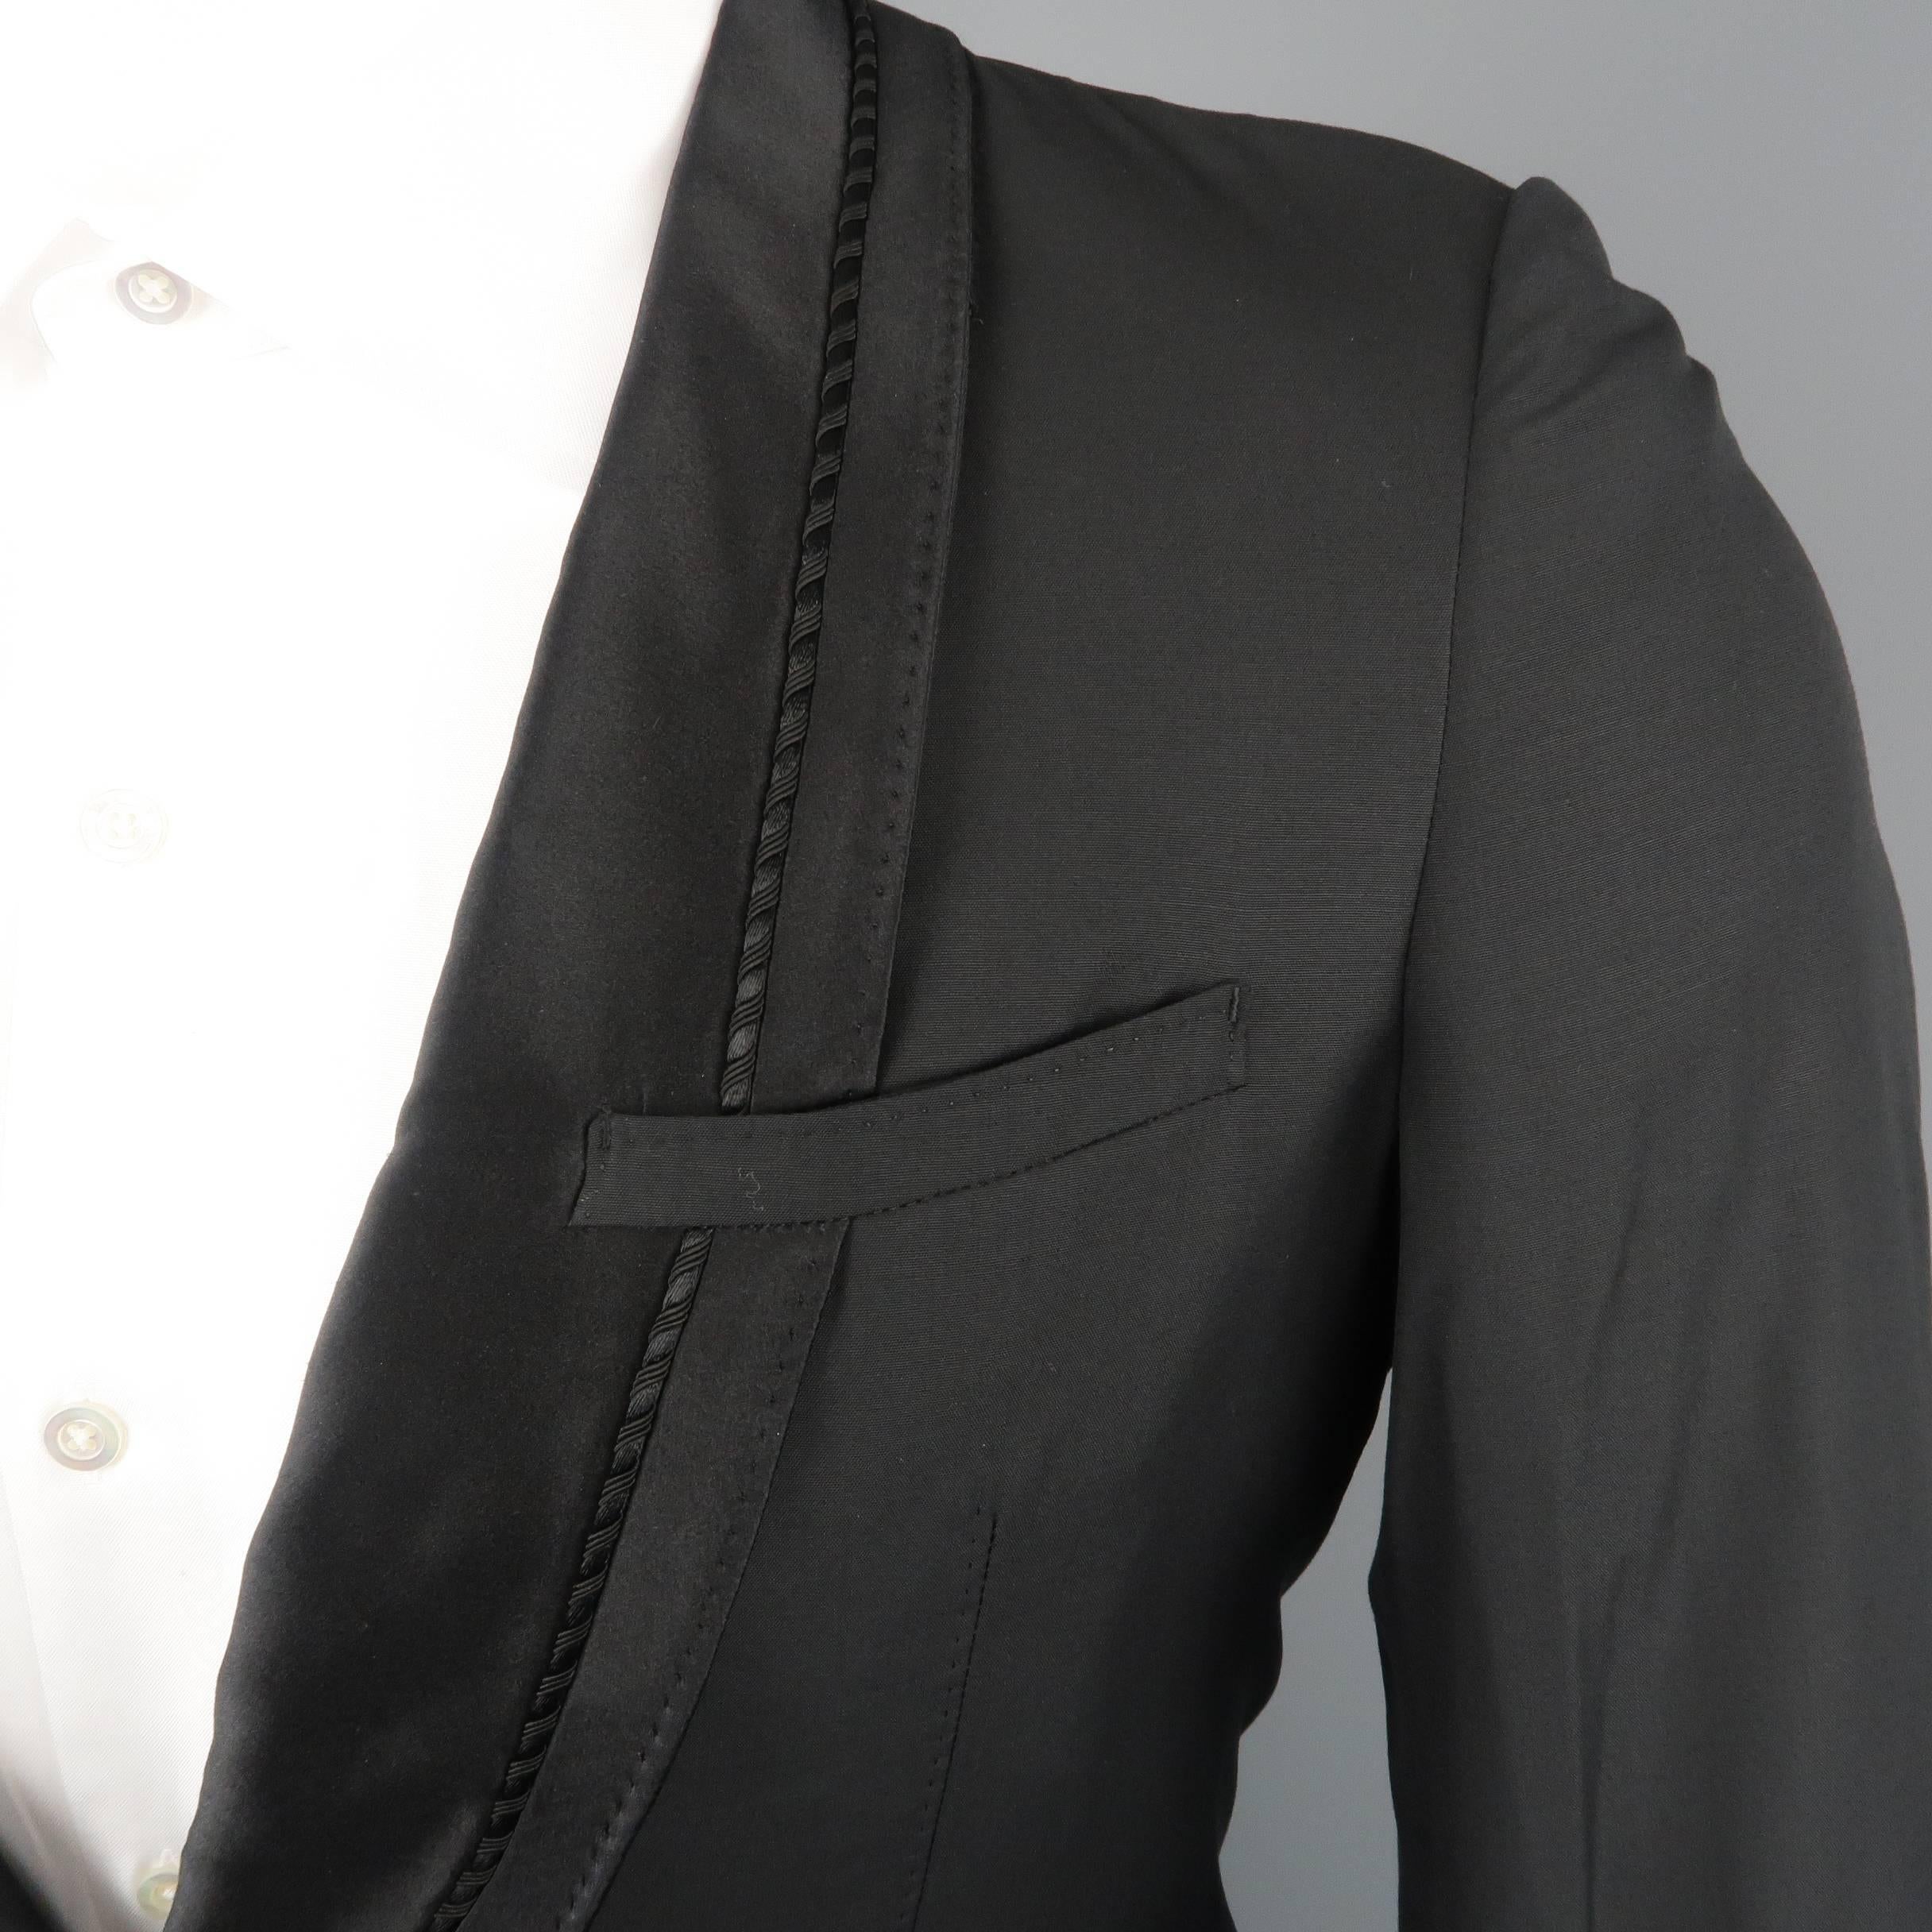 Single button MIHARAYASUHIRO tuxedo jacket comes in light weight black wool with a satin, piping detailed shawls collar that overlaps the breast pocket and functional button cuffs. Vent seam still intact. Never worn.Made in Japan.
 
Excellent